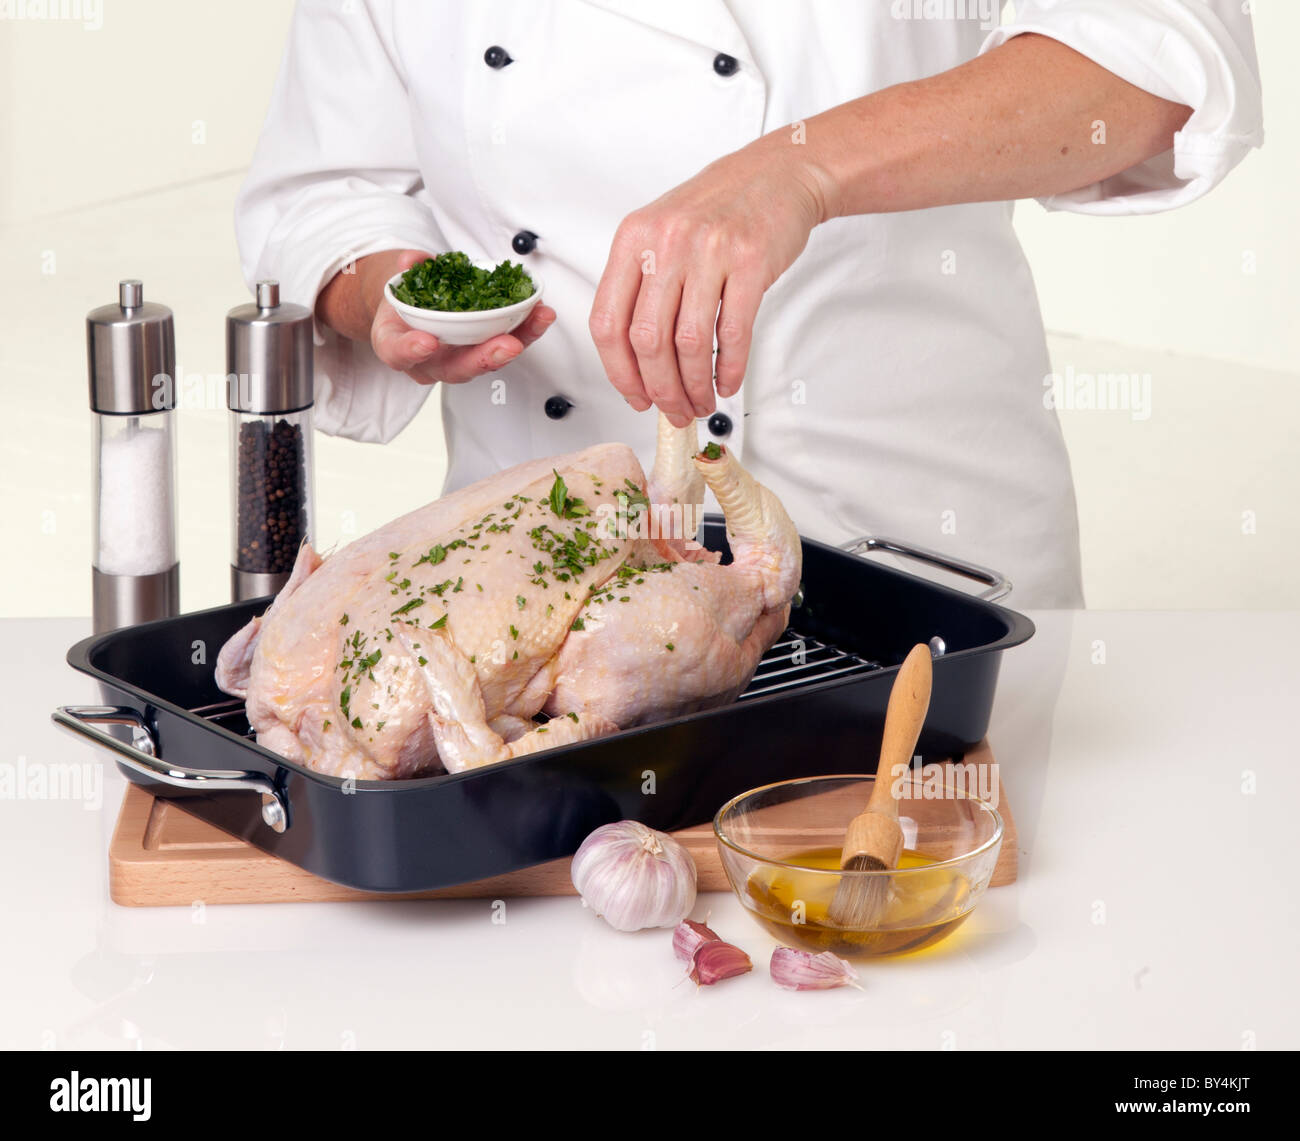 CHEF SEASONING WHOLE CHICKEN FOR ROASTING Stock Photo